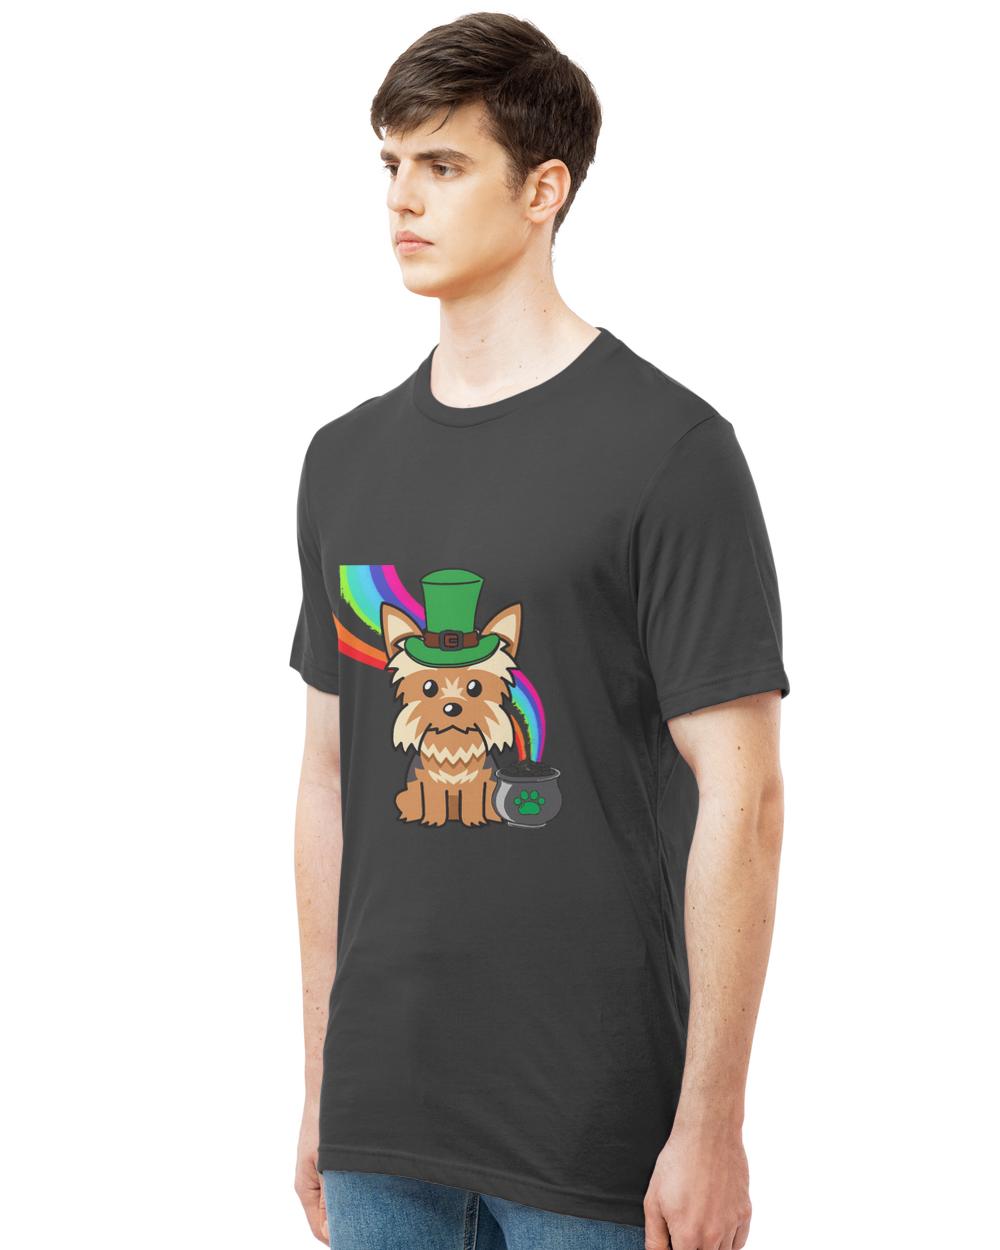 Yorkshire Terrier T- Shirt Funny yorkshire terrier celebrates st patrick's day T- Shirt